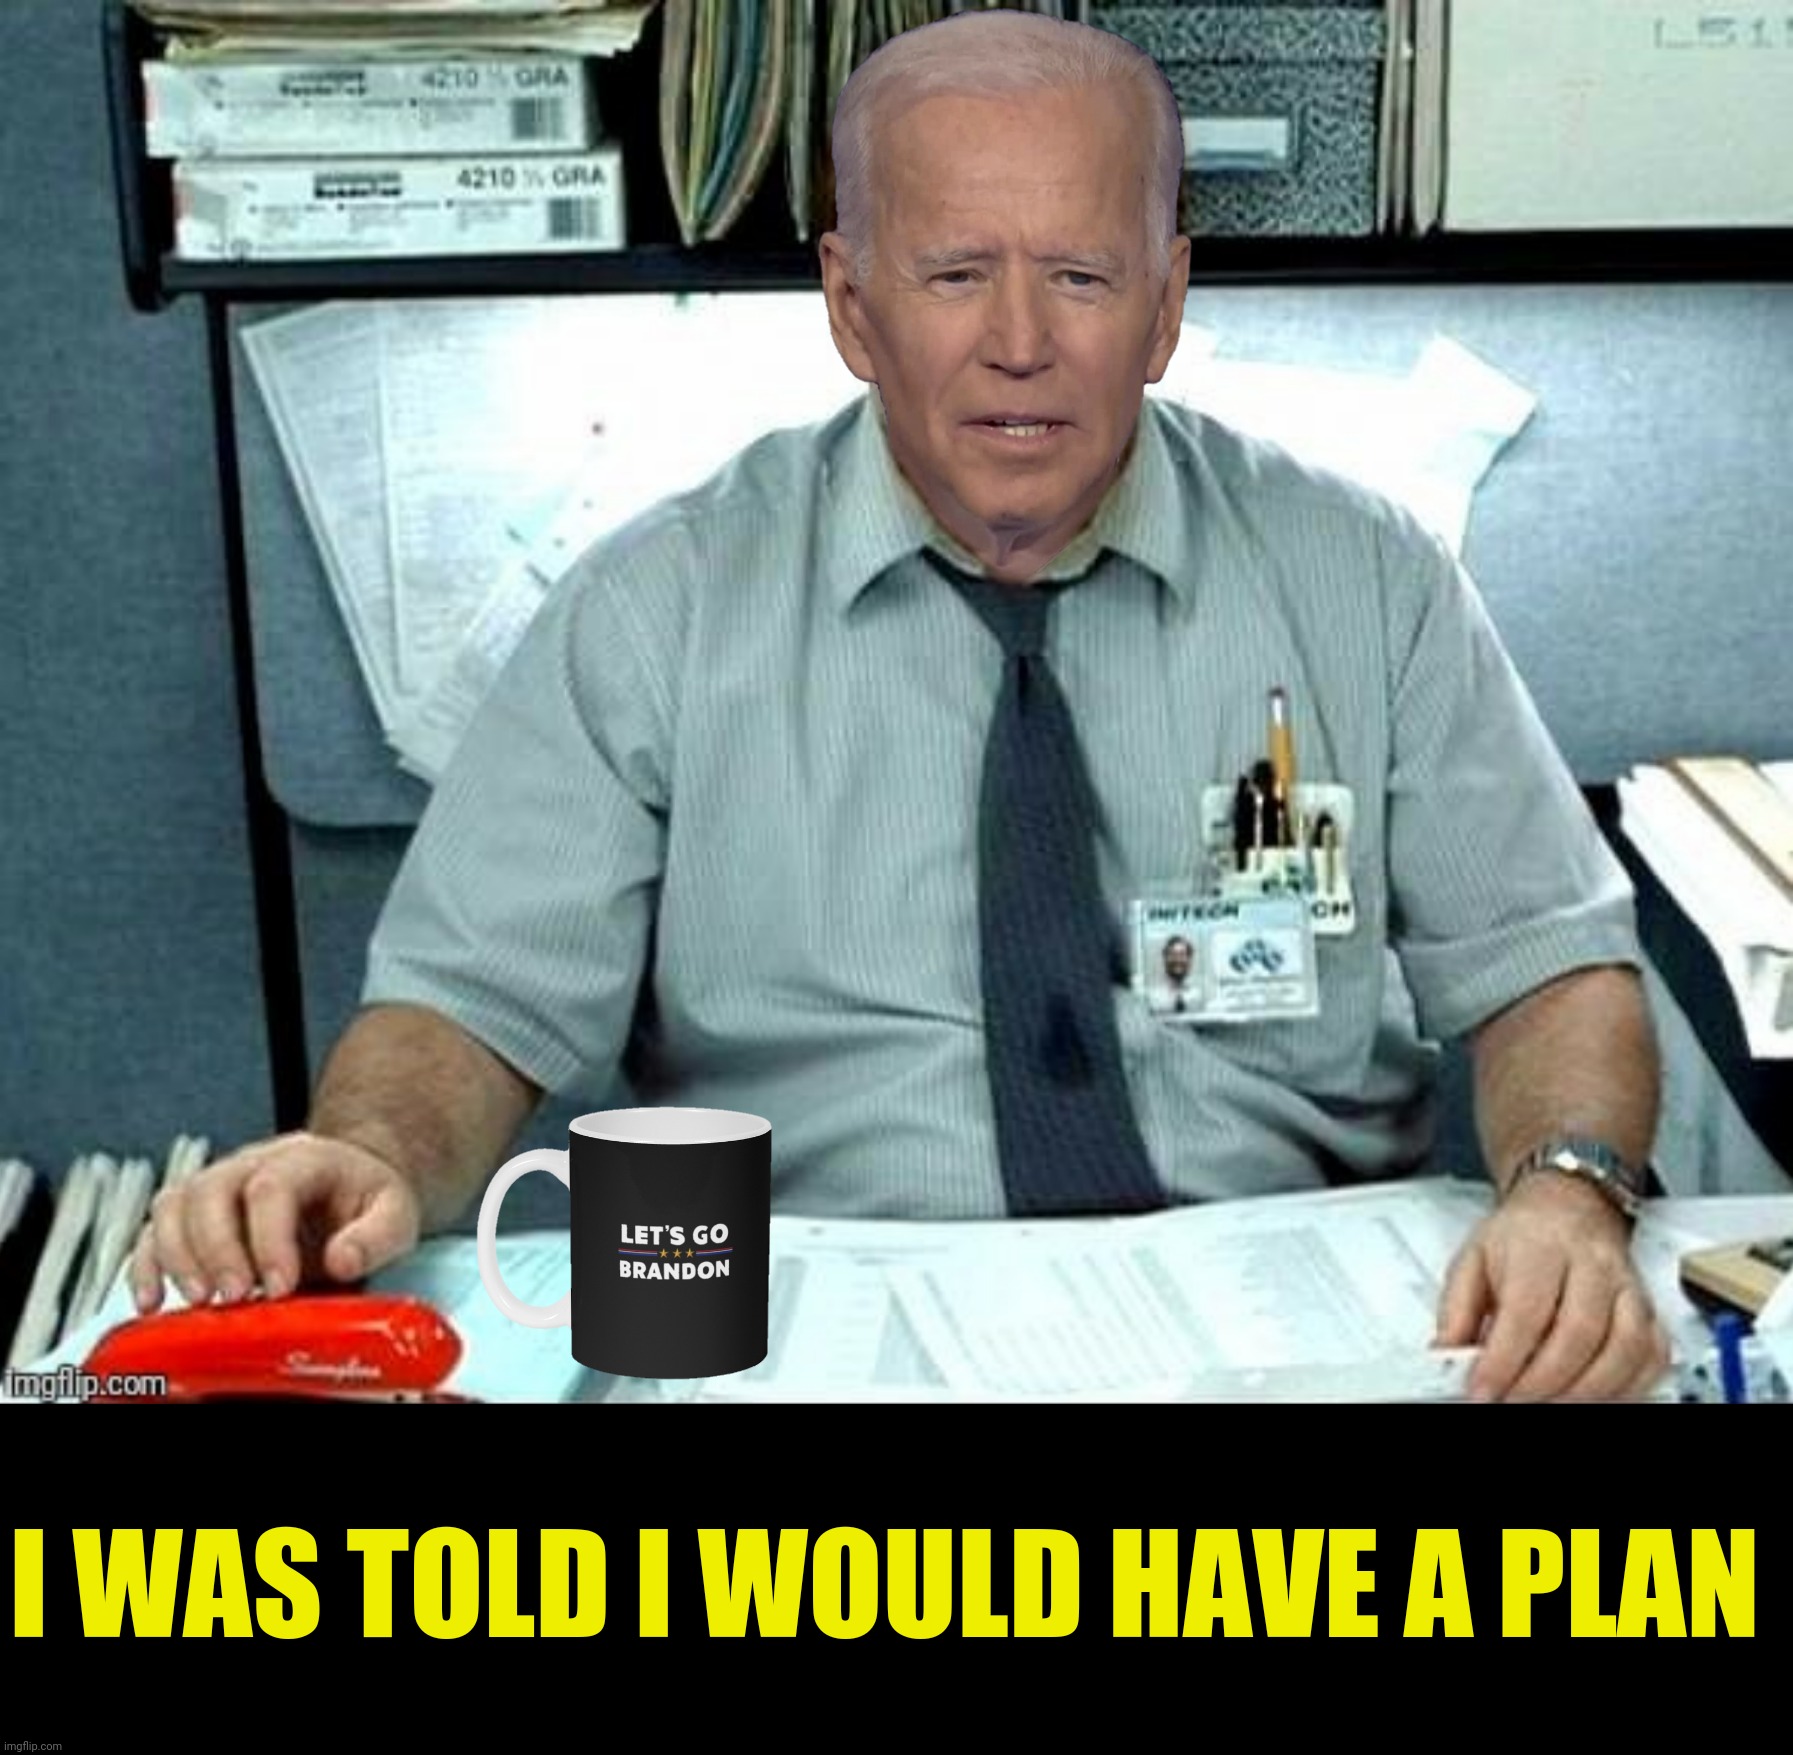 The face you make when you realize you don't have a plan |  I WAS TOLD I WOULD HAVE A PLAN | image tagged in bad photoshop,joe biden,office space,let's go brandon,i was told there would be | made w/ Imgflip meme maker